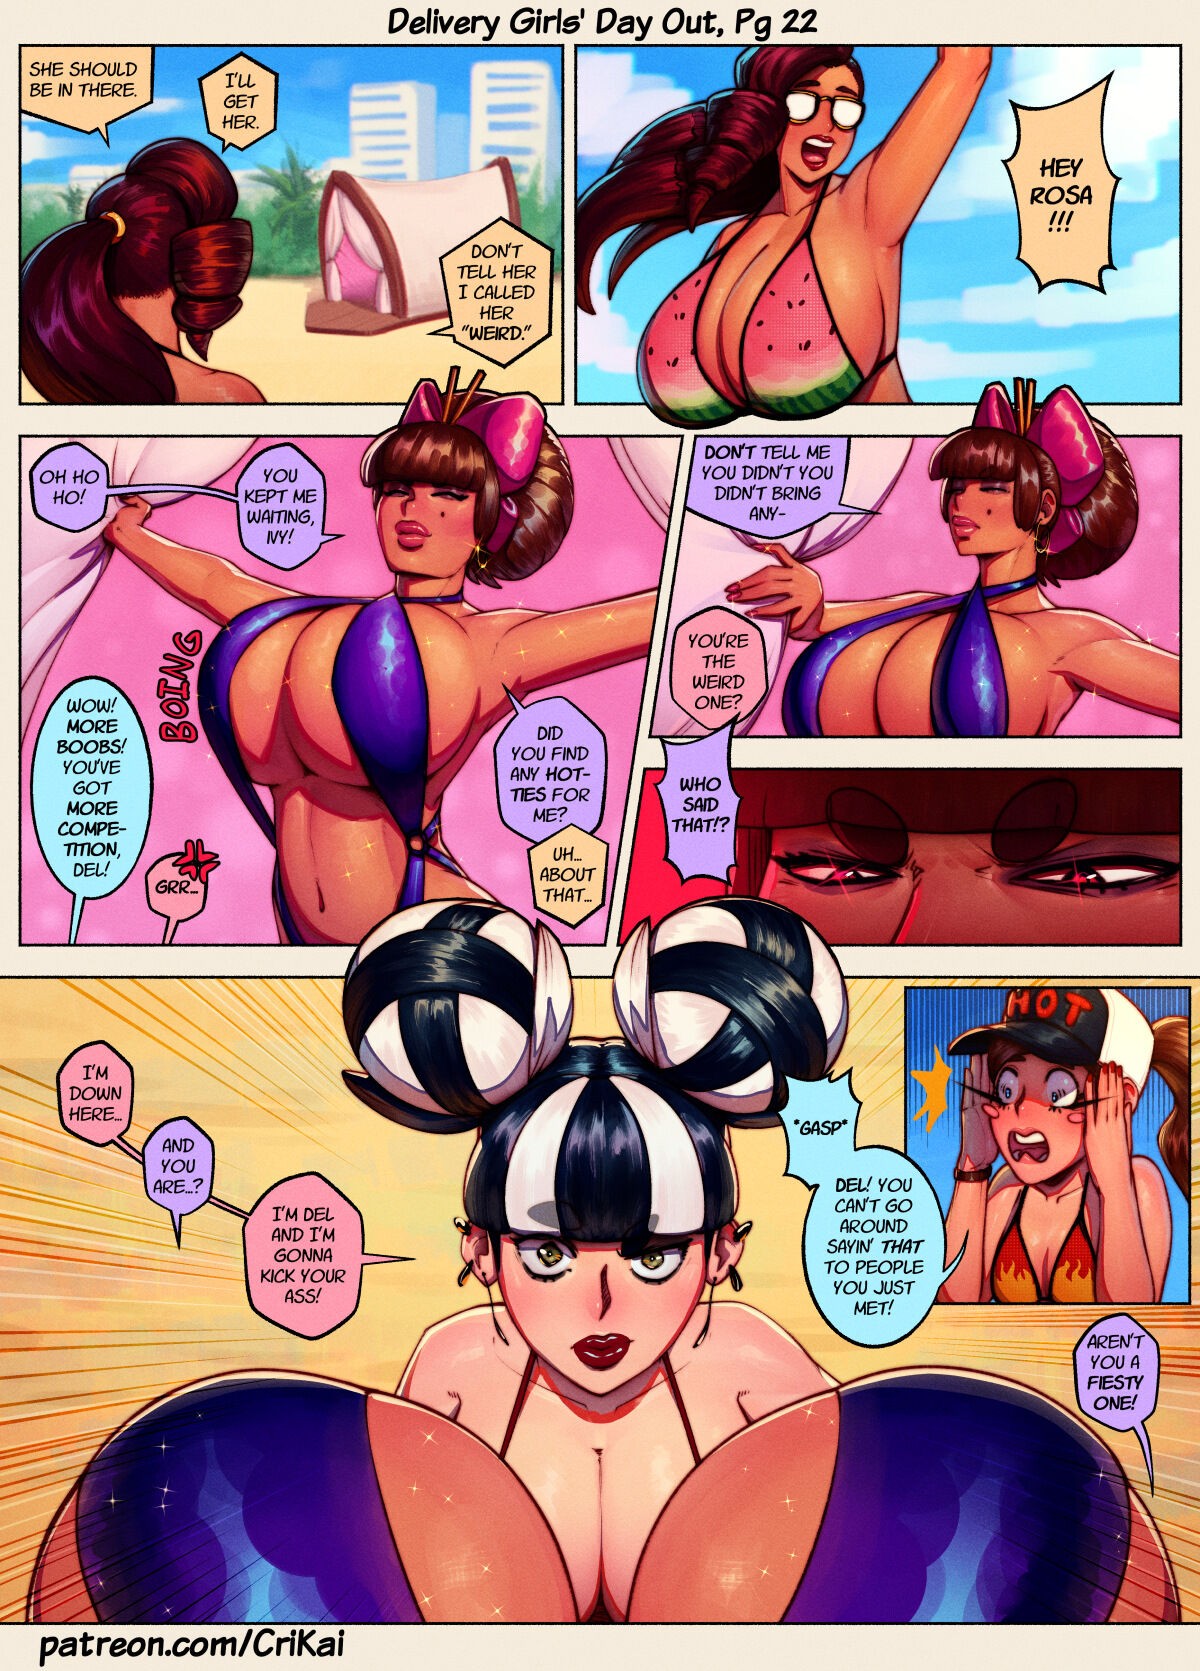 Delivery Girl’s Day Out Porn Comic english 28